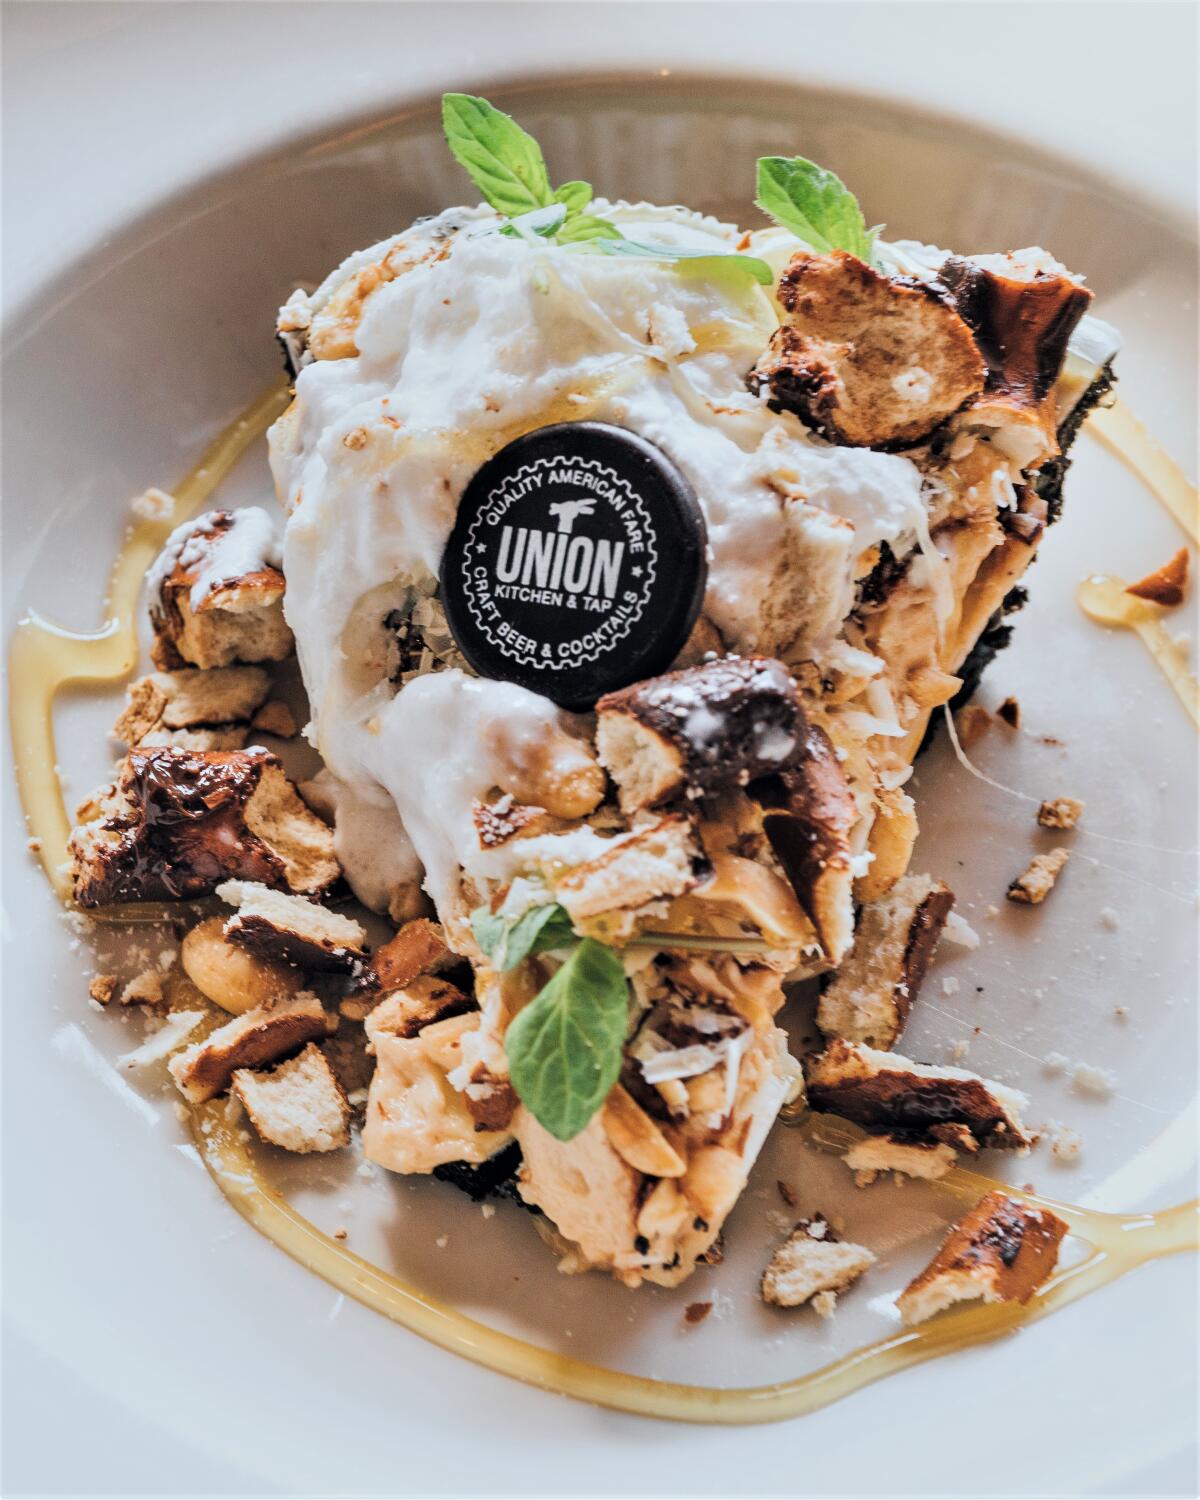 Aunt Dubo's Peanut Butter Pie, available at Union Kitchen & Tap Encinitas